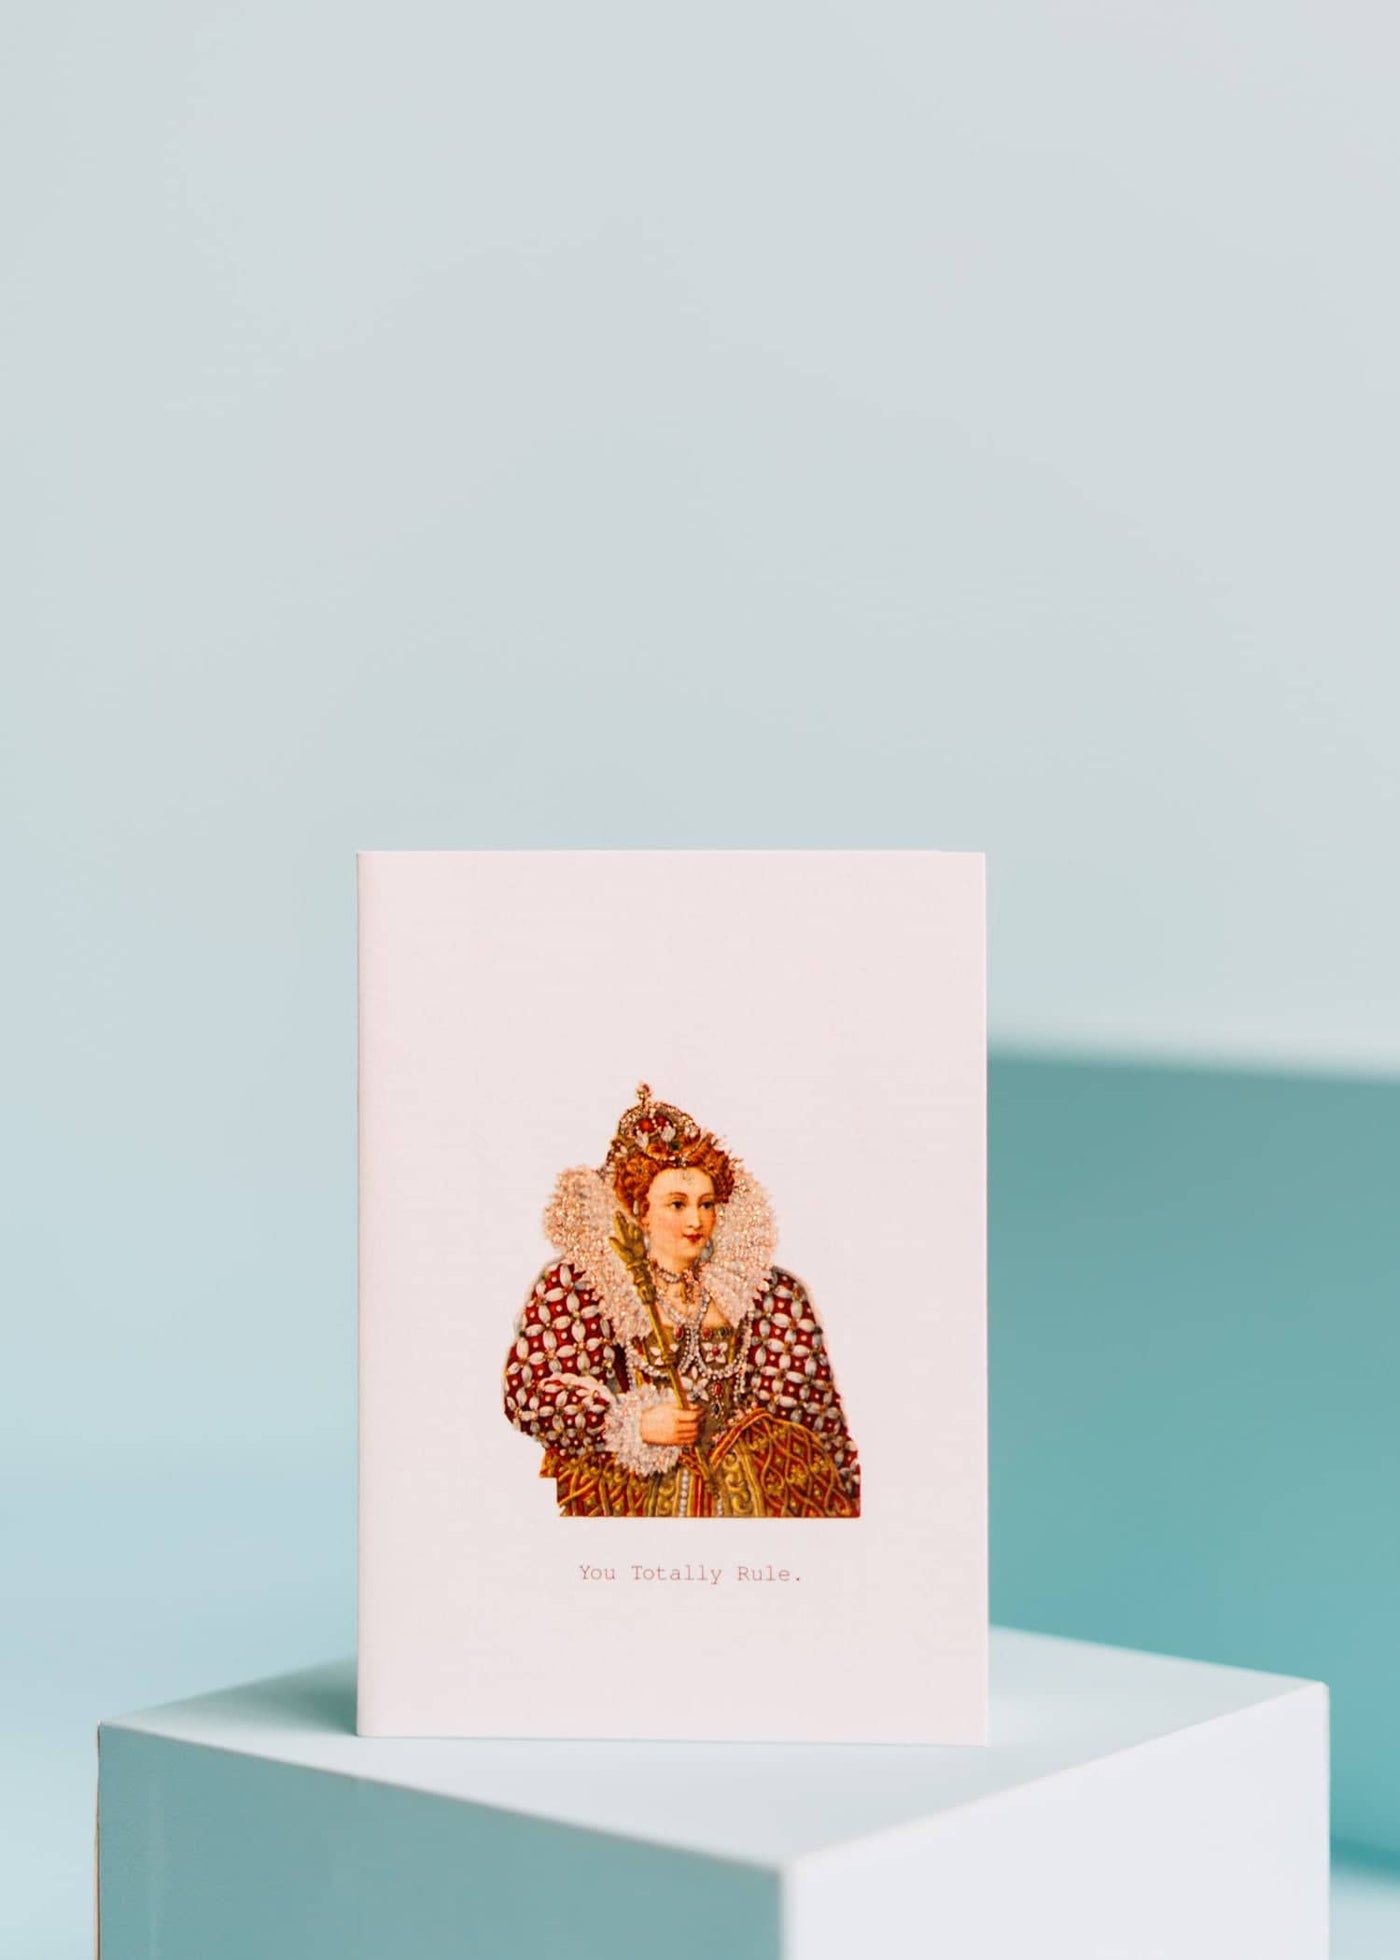 GREETING CARD "YOU TOTALLY RULE"